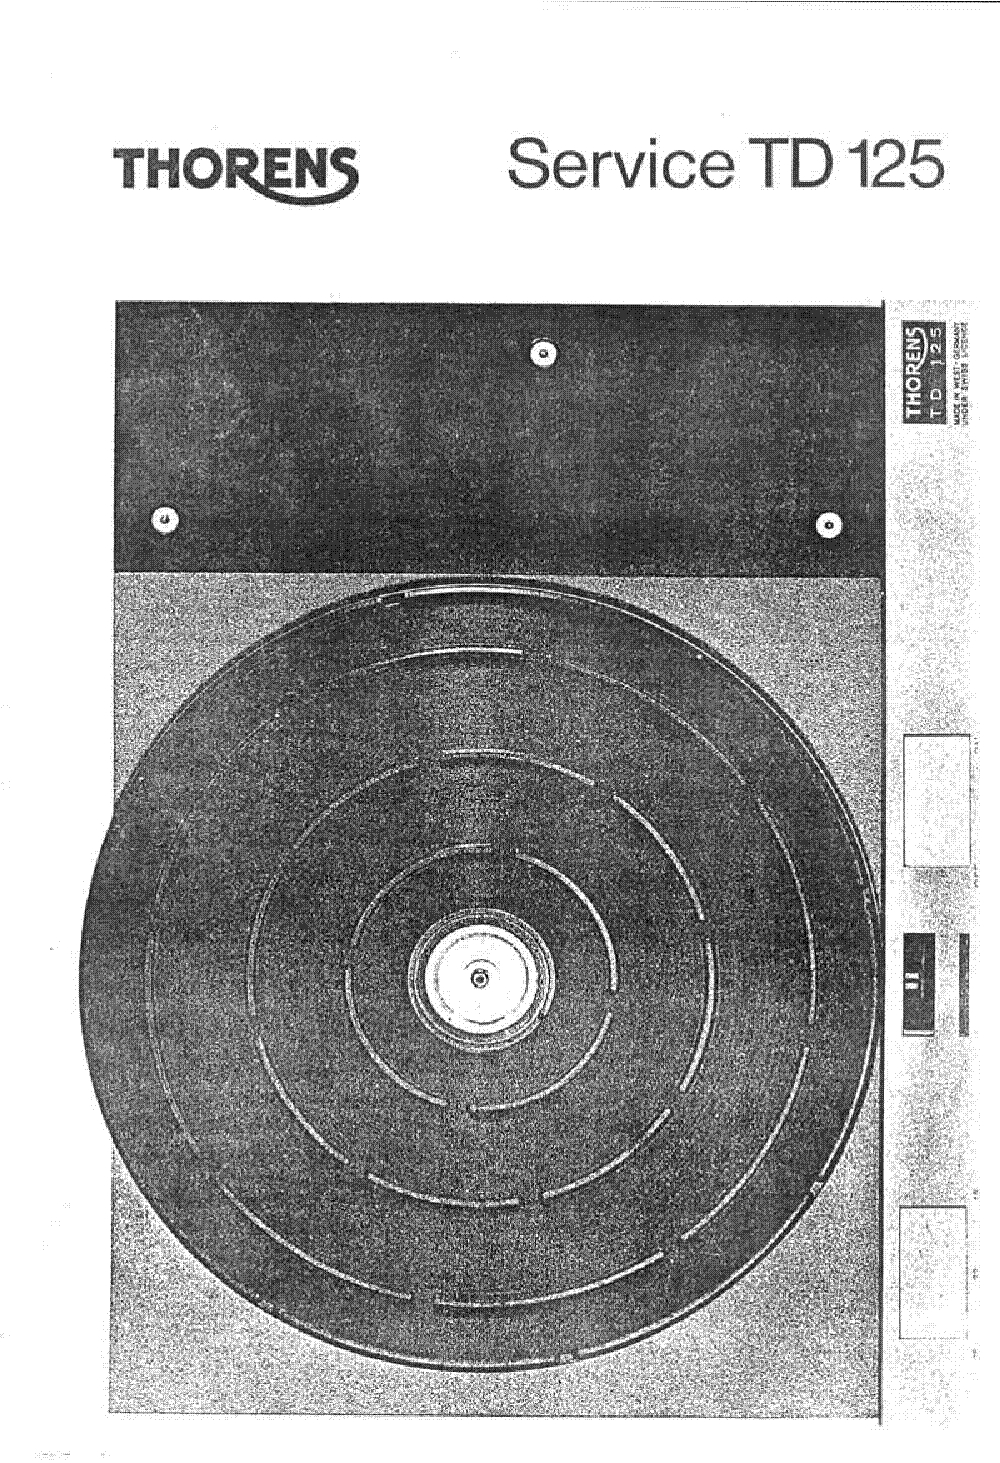 THORENS TD-125 service manual (1st page)